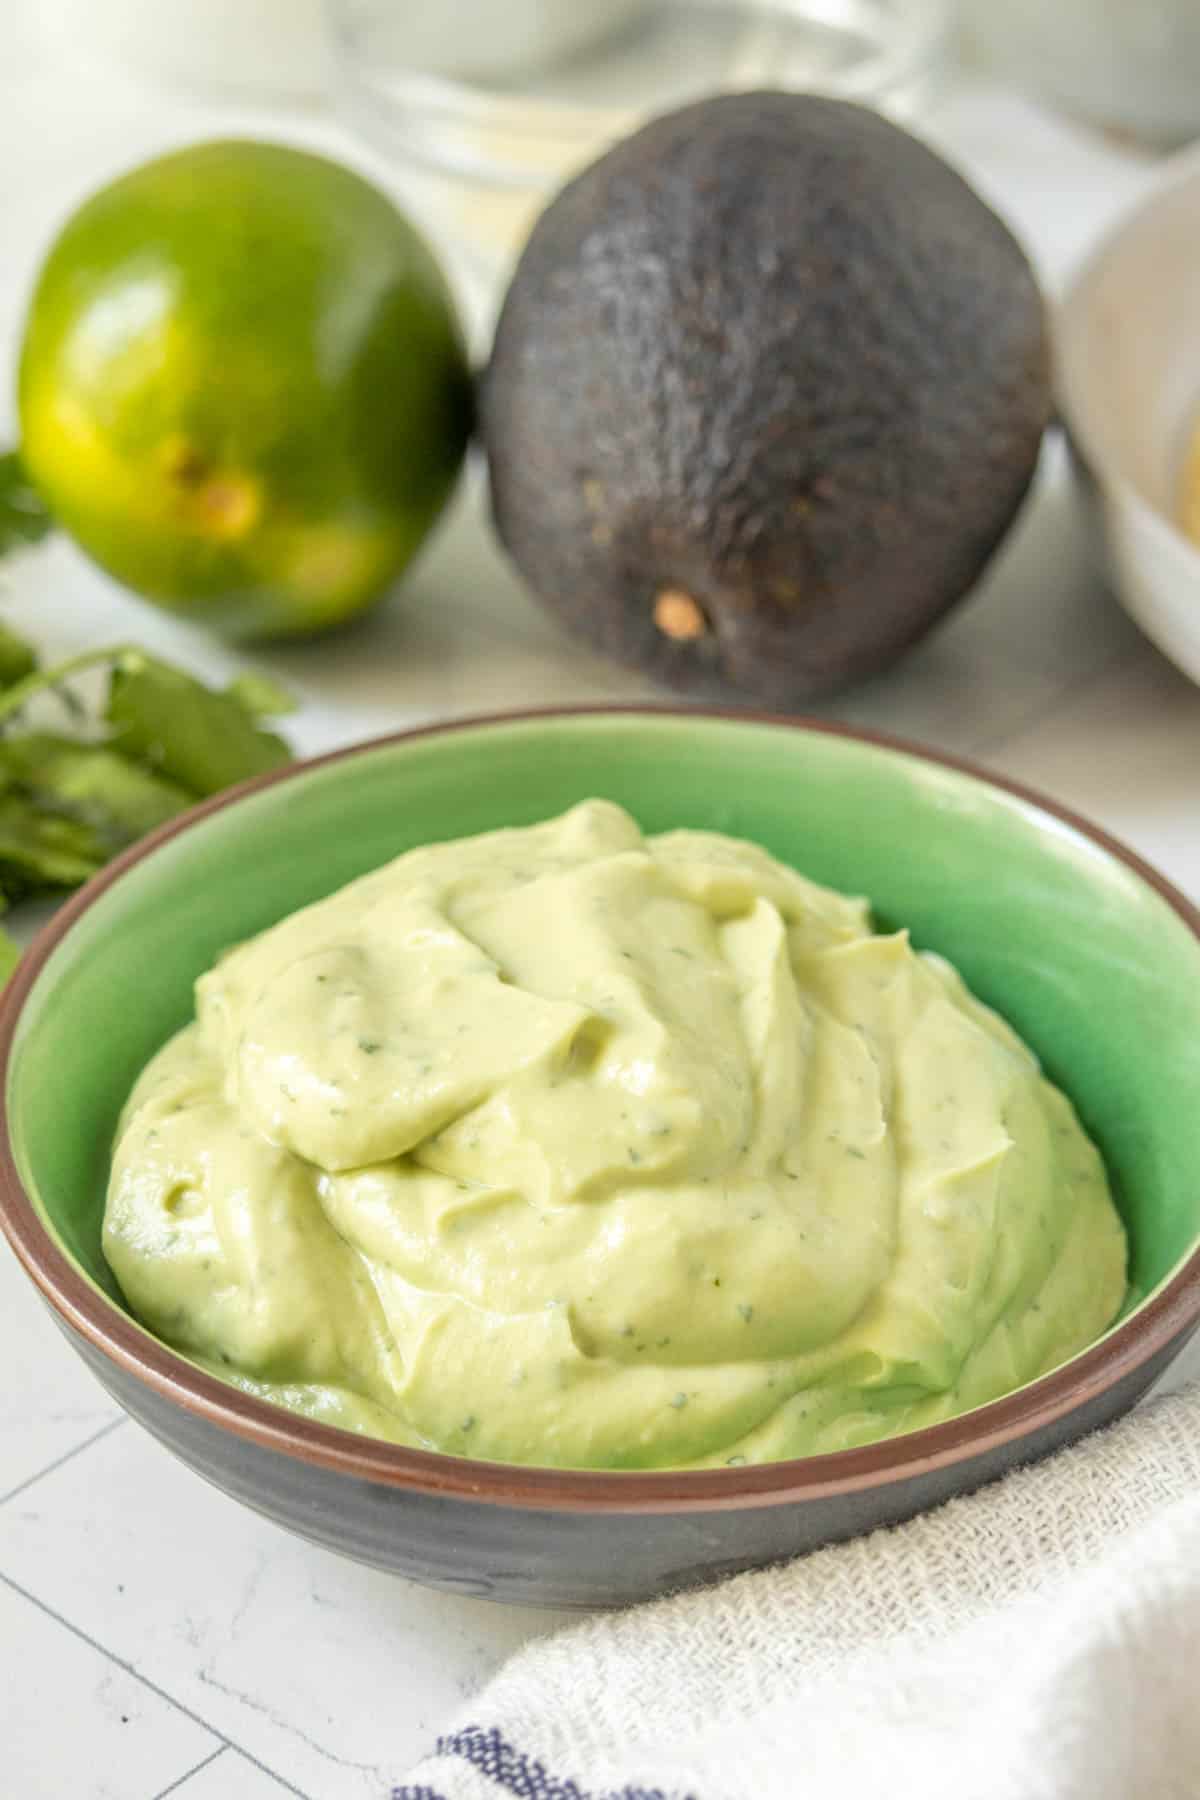 Avocado crema in a bowl with limes and other ingredients.